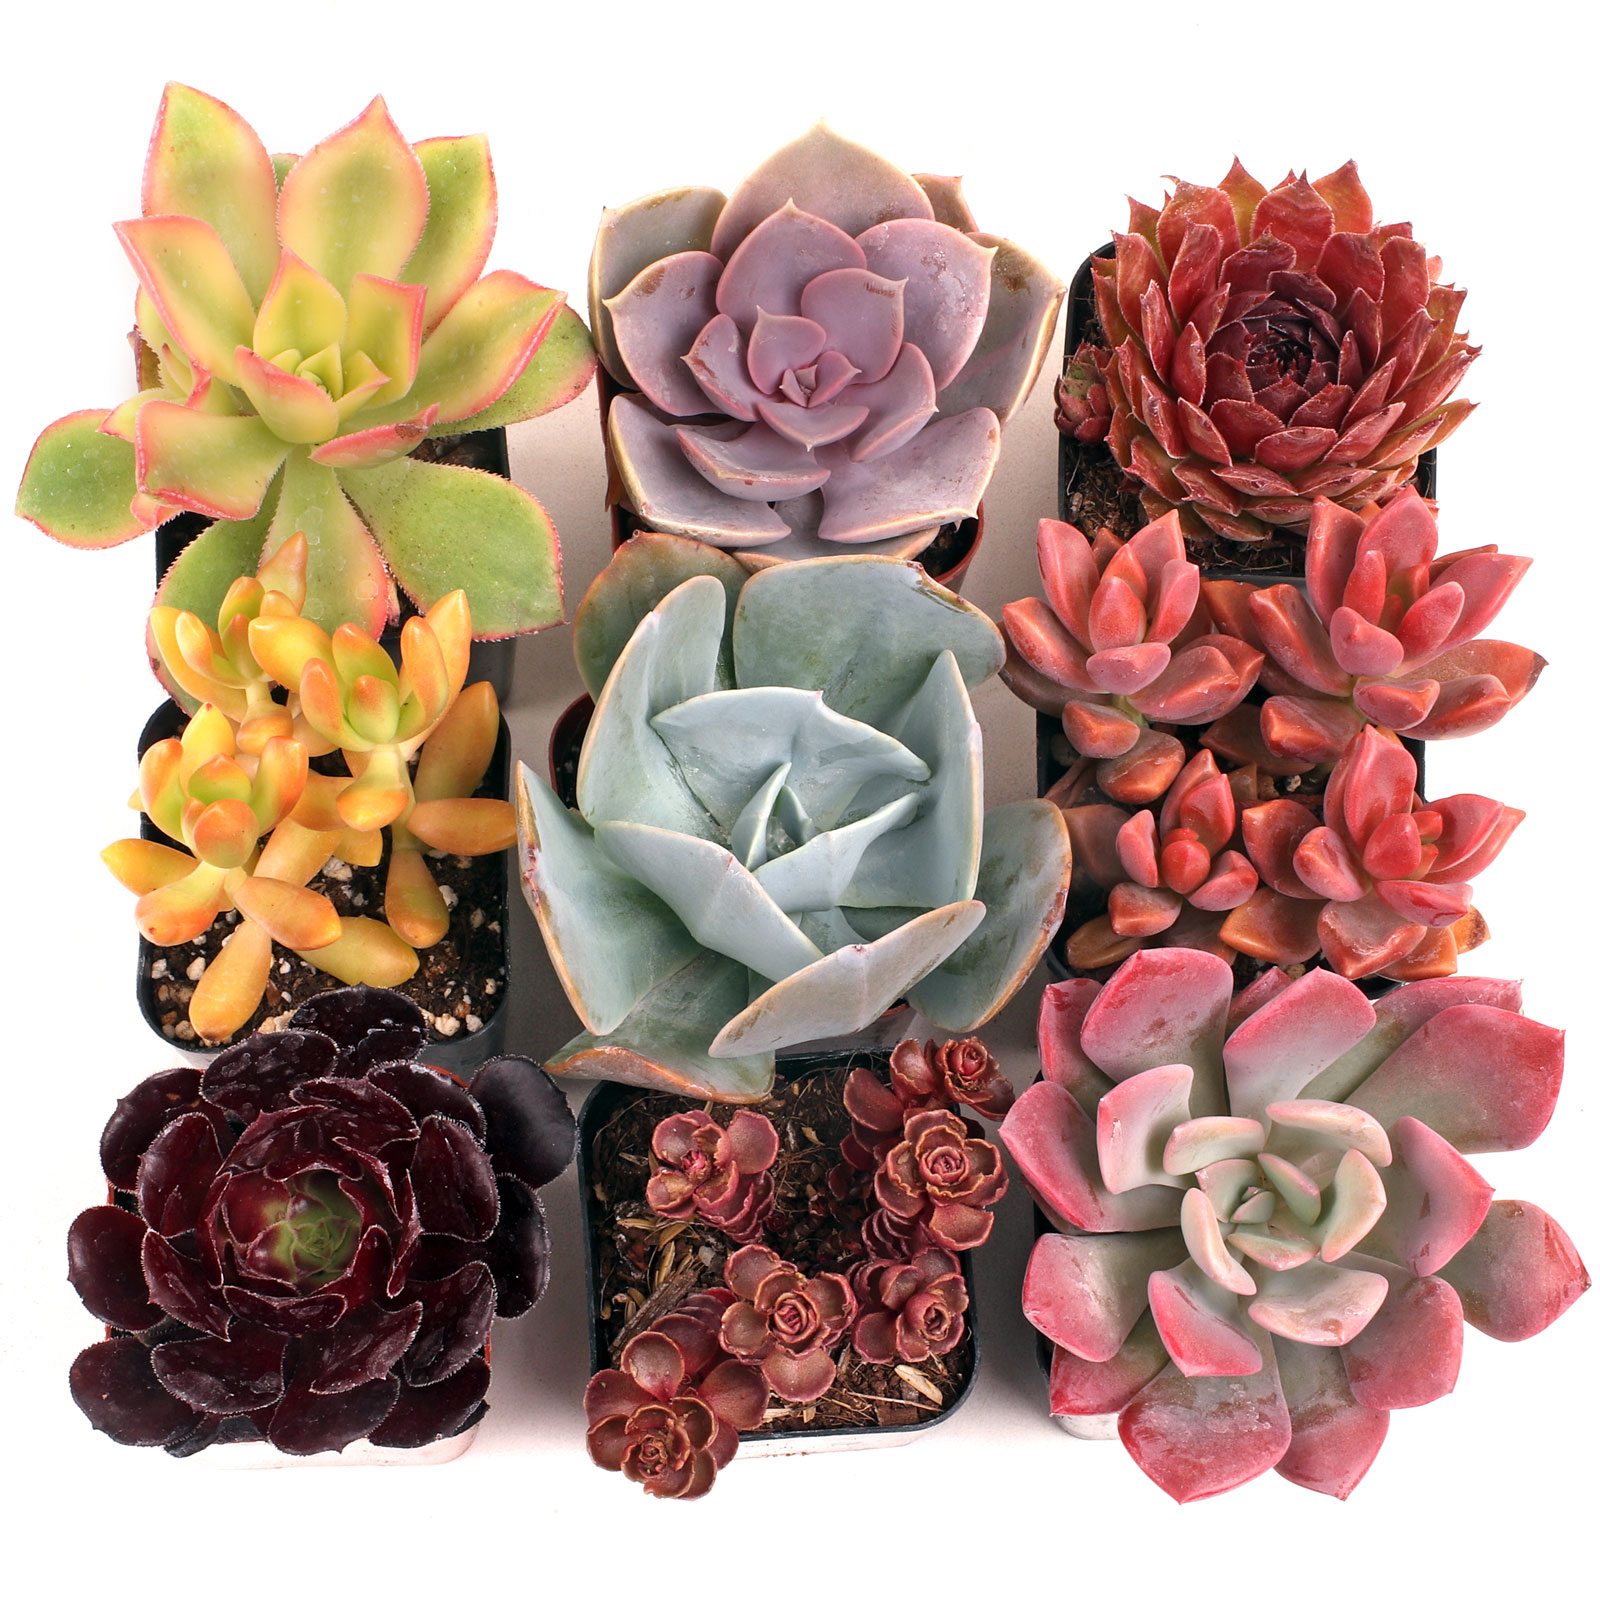 MCG Nuthin' But Color™ Succulent Set of 9 - 2in Pots w/ ID Questions & Answers